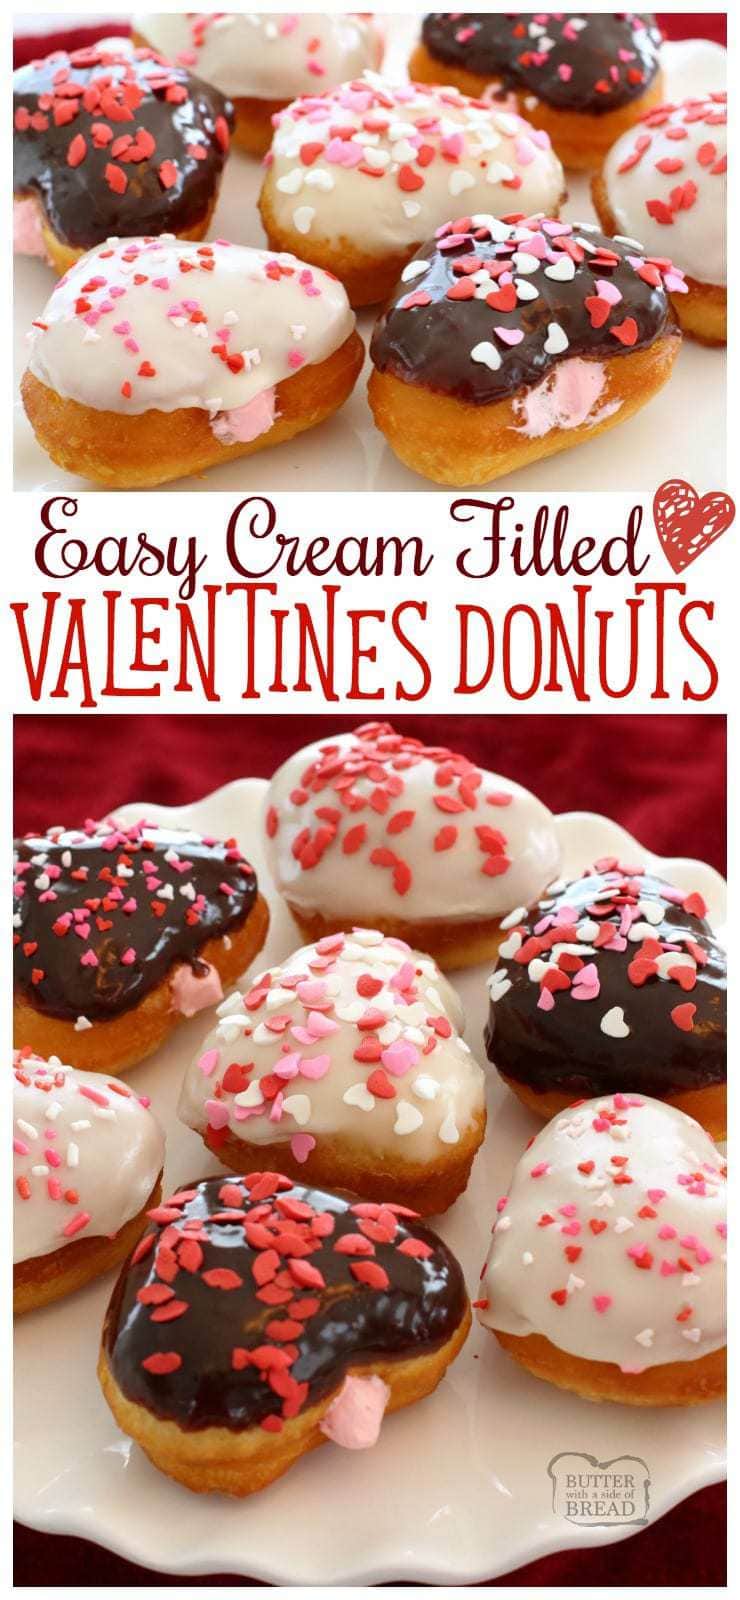 These Easy Valentines Donuts are simple and fast - just start with store-bought biscuits and you'll end with these darling, heart-shaped treats!